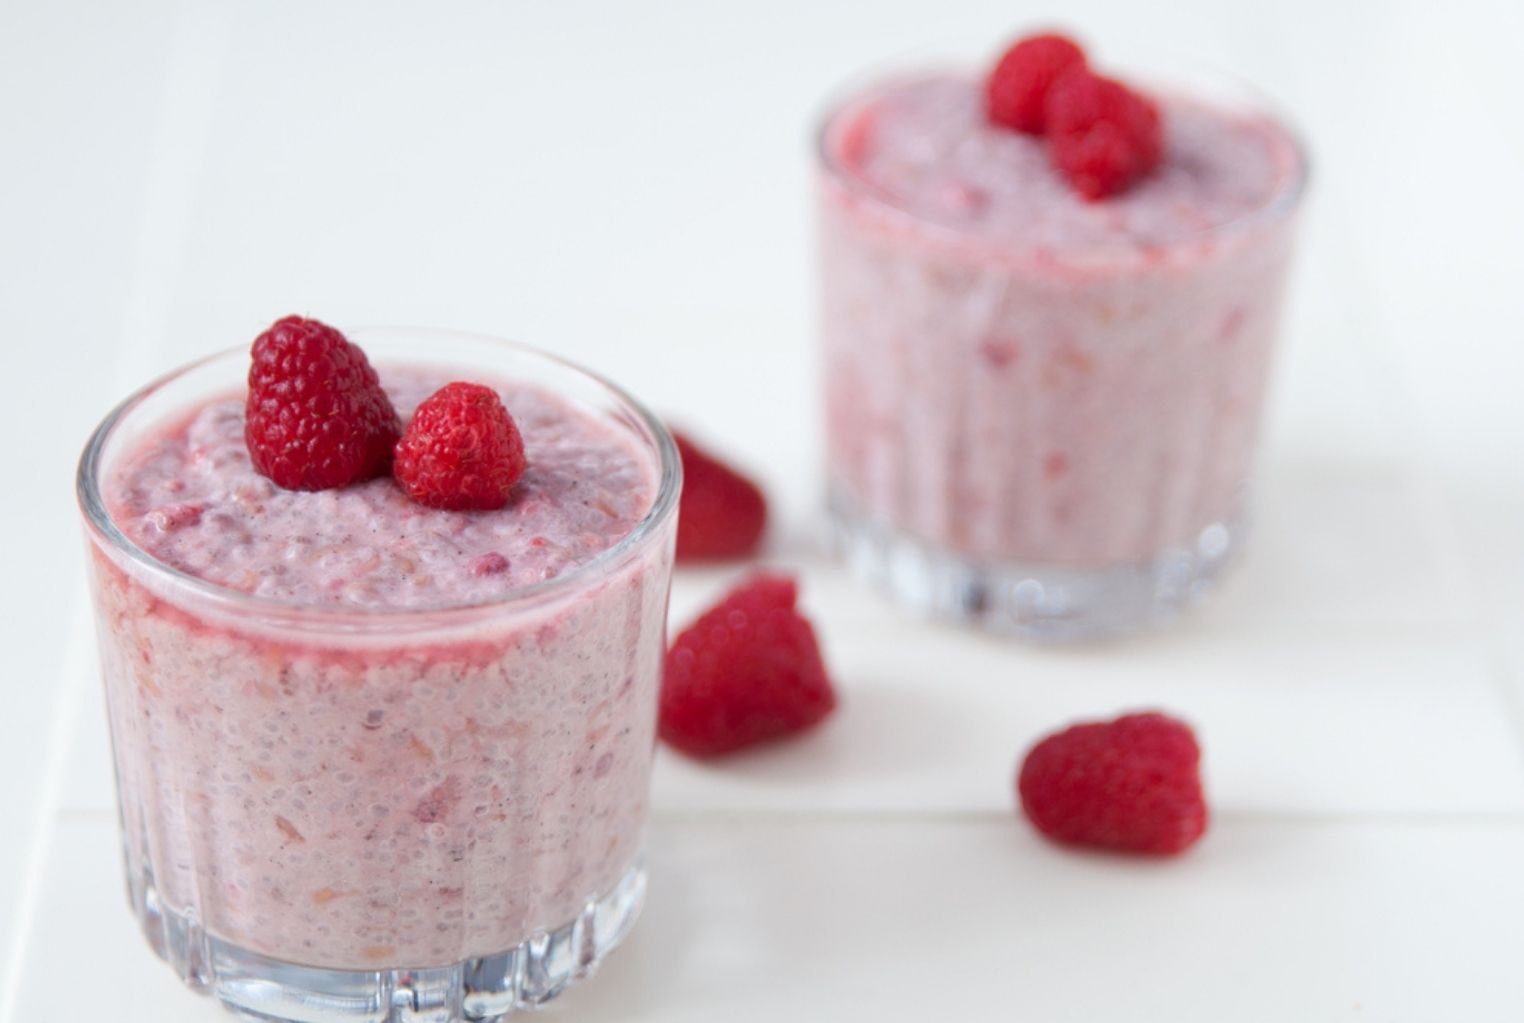 Two clear glasses holding pink chia pudding with raspberries on top.